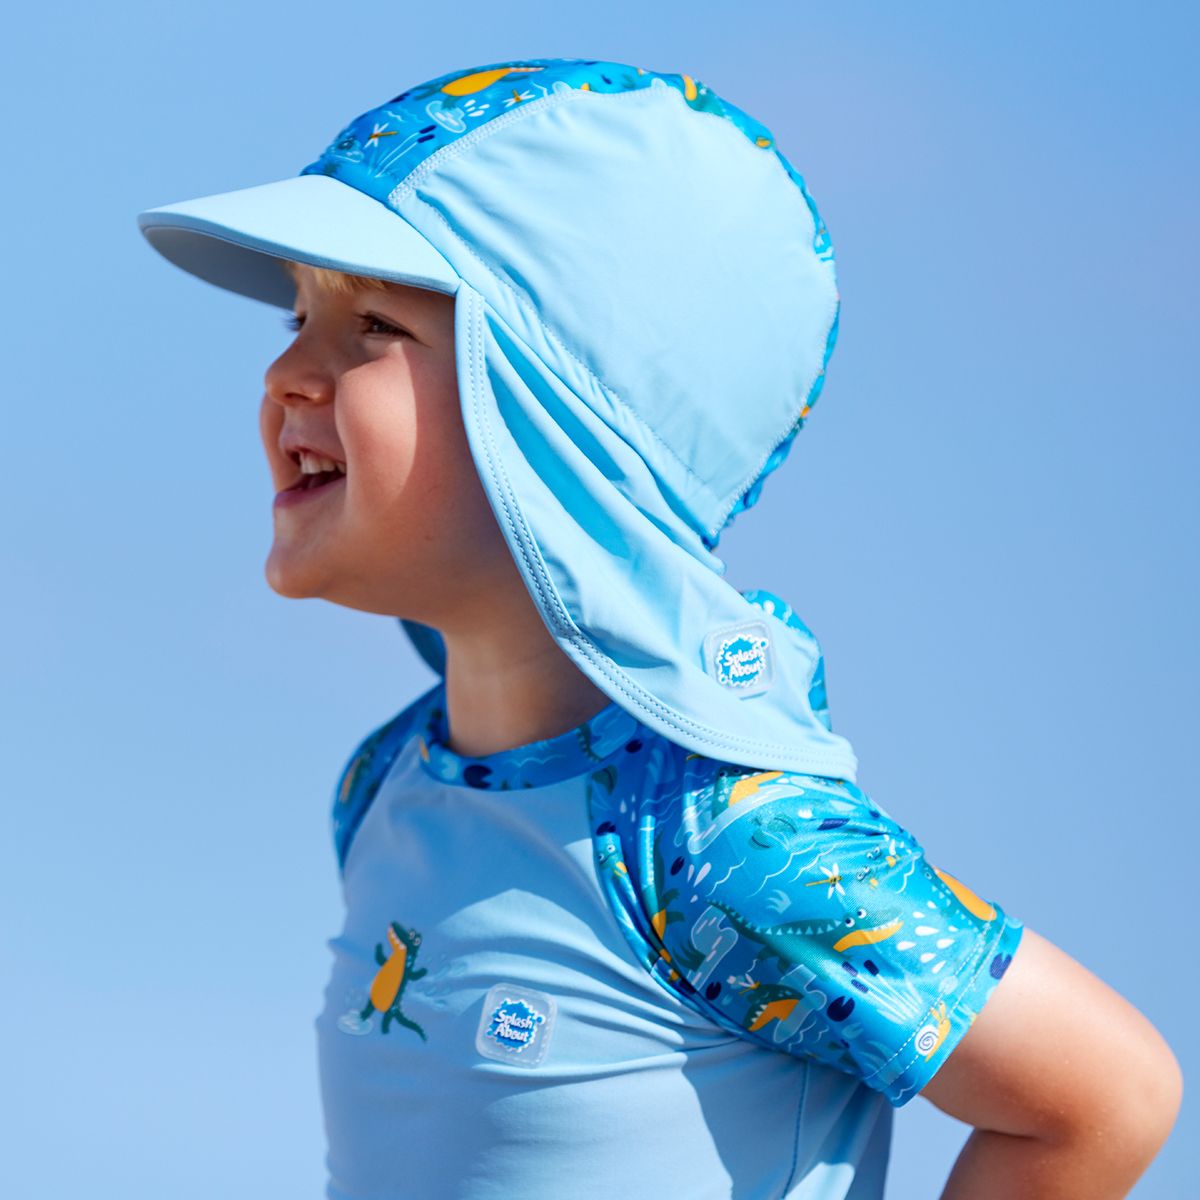 Lifestyle image of toddler wearing a legionnaire style sun hat in the beach. The hat is light blue and blue, with swamp themed print panel including crocodiles, frogs, fireflies and more. He's also wearing matching rash top.